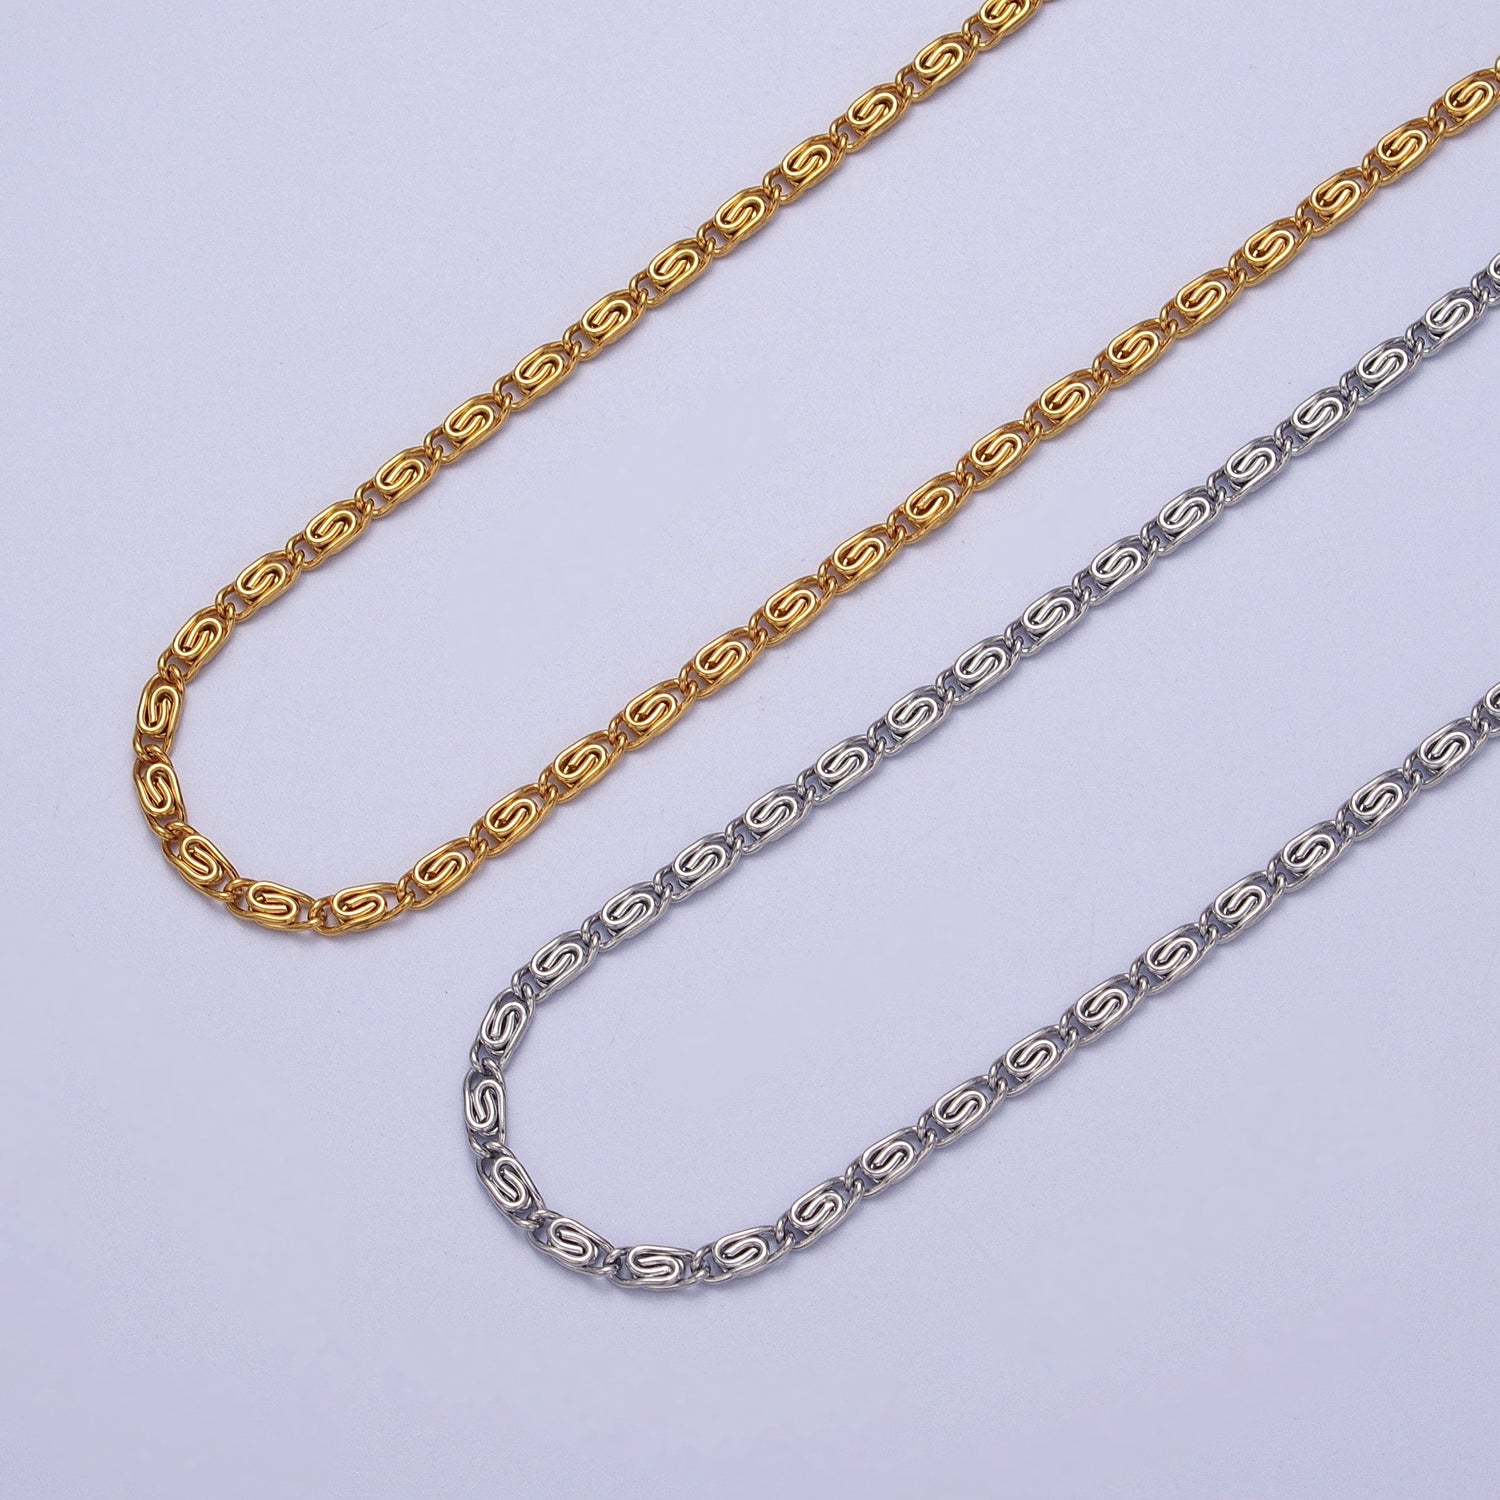 Gold Filled 2.6mm Gold & Silver Scroll Chain in 16, 18, 20 Inch Length Necklace | WA-1486, WA-1482, WA-1488 - DLUXCA